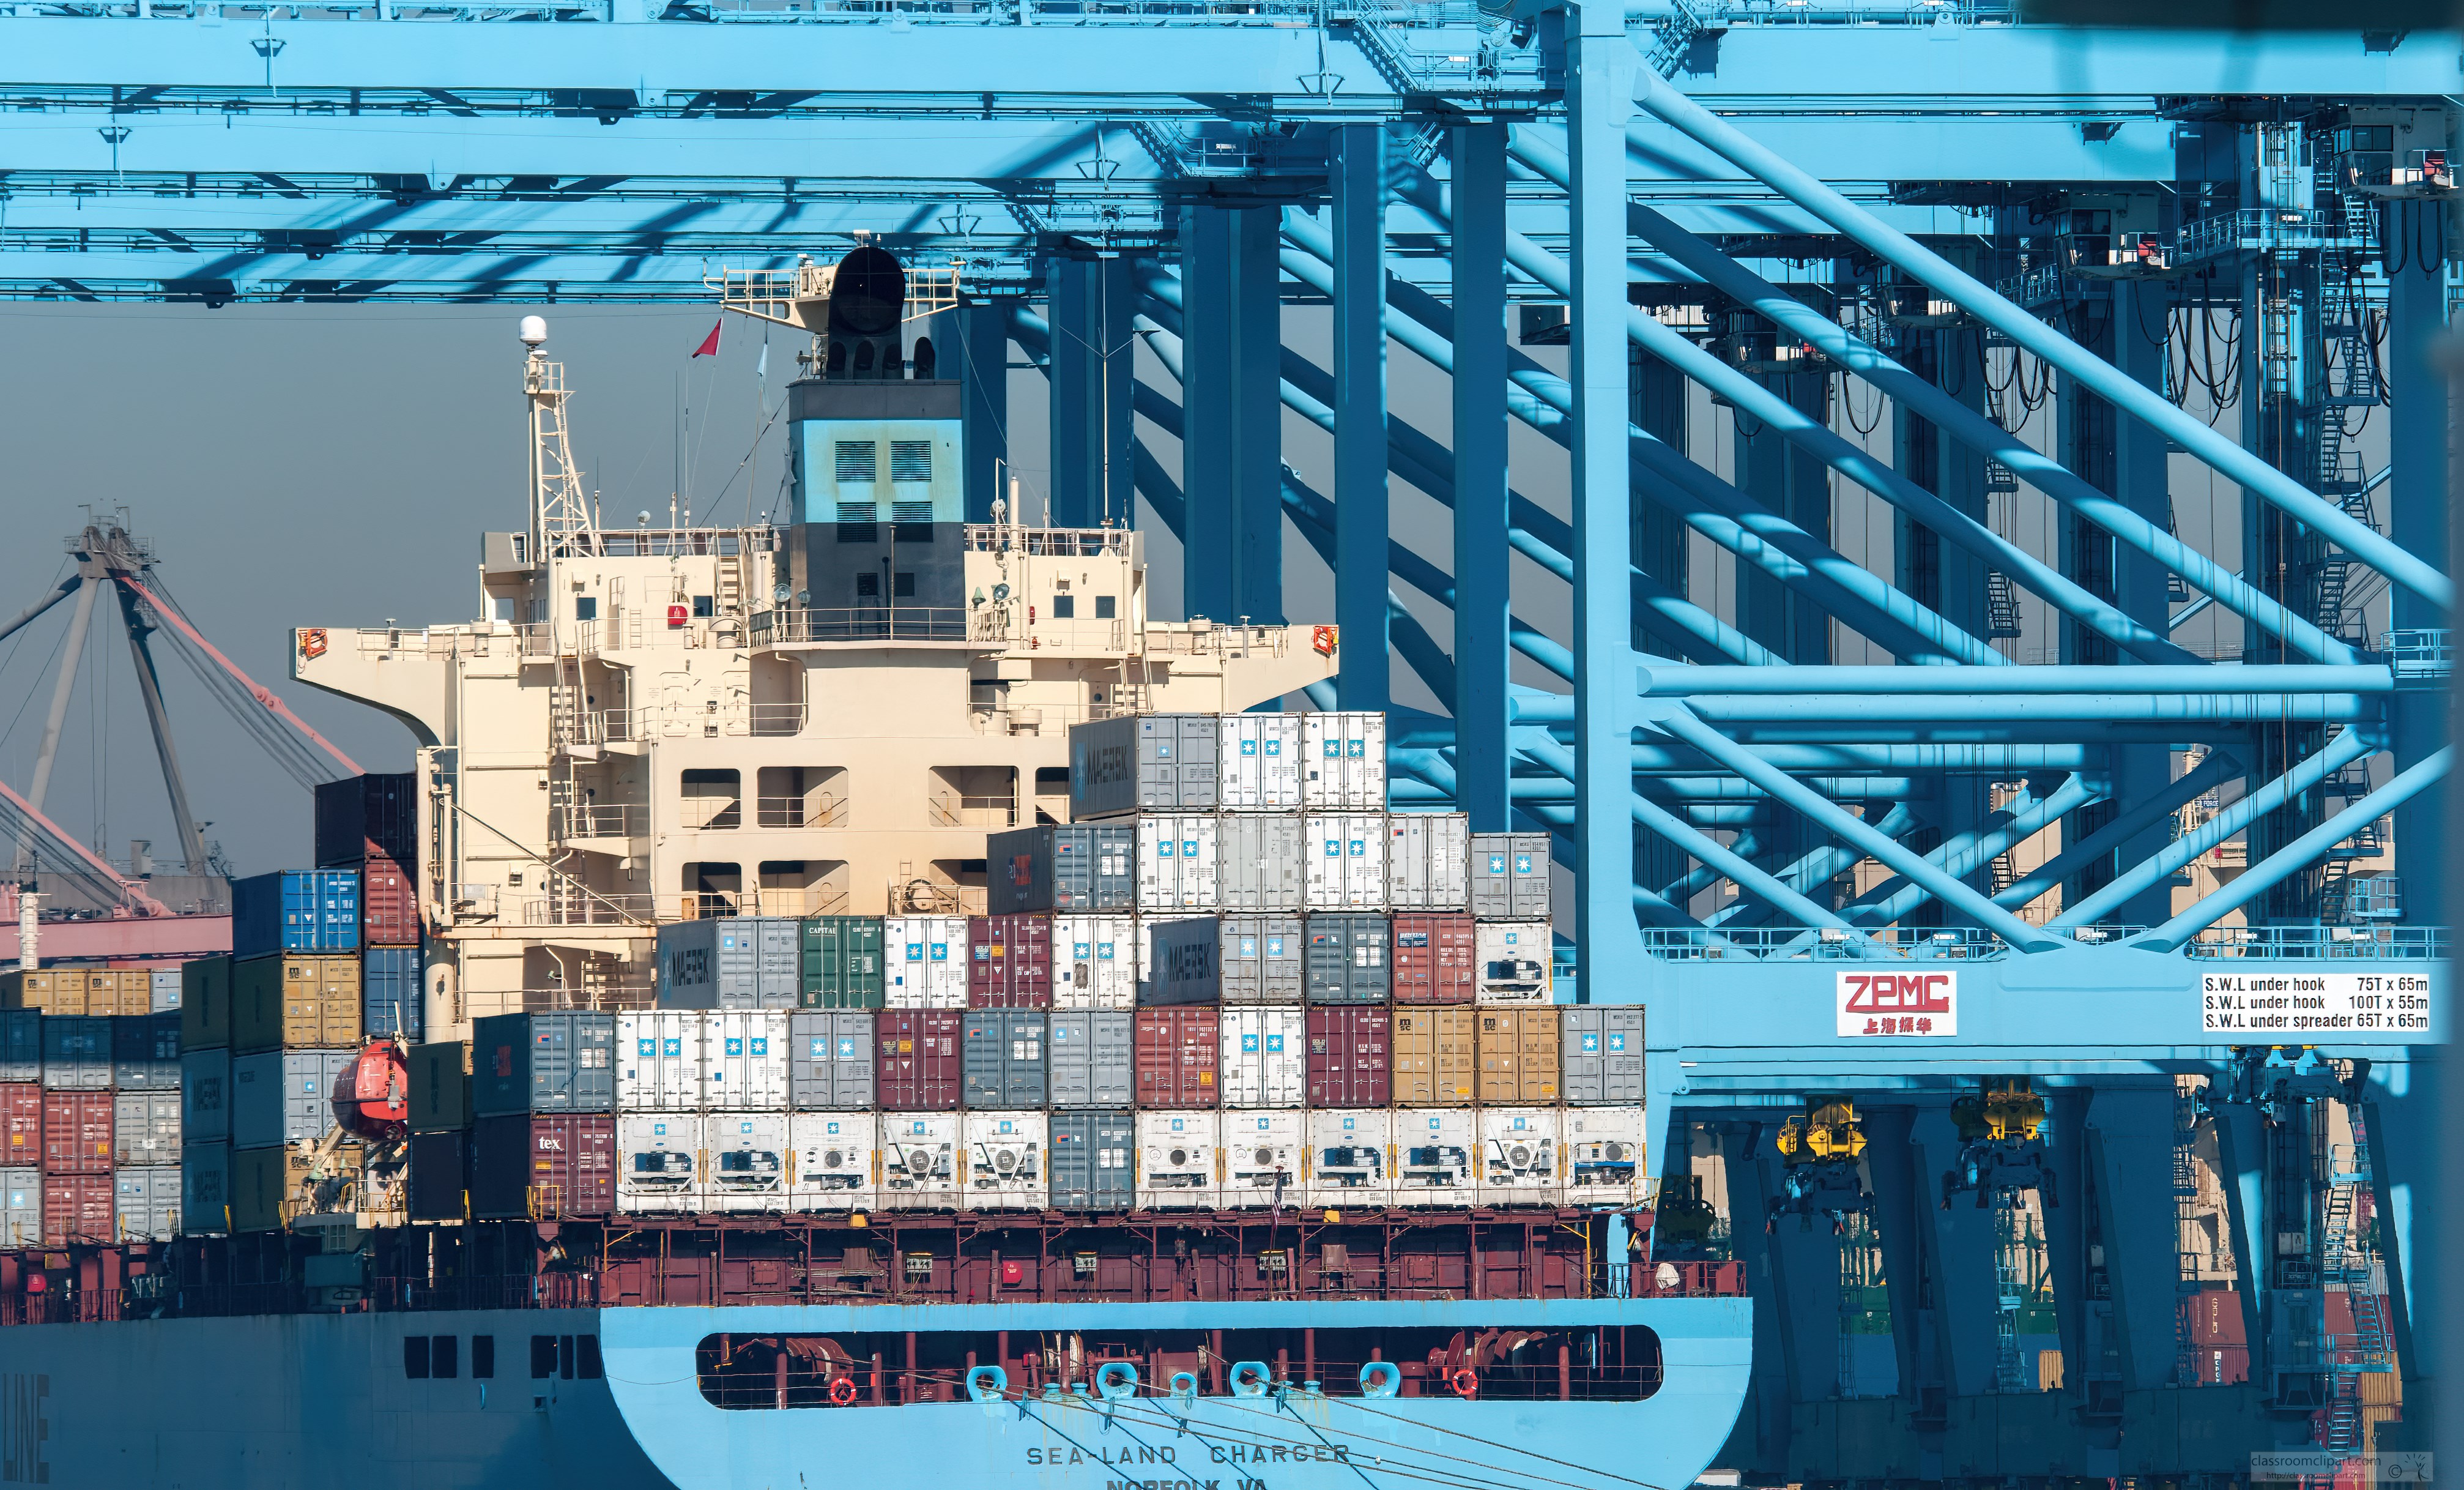 large-ship-filled-with-containers-in-los-angeles-harbor.jpg